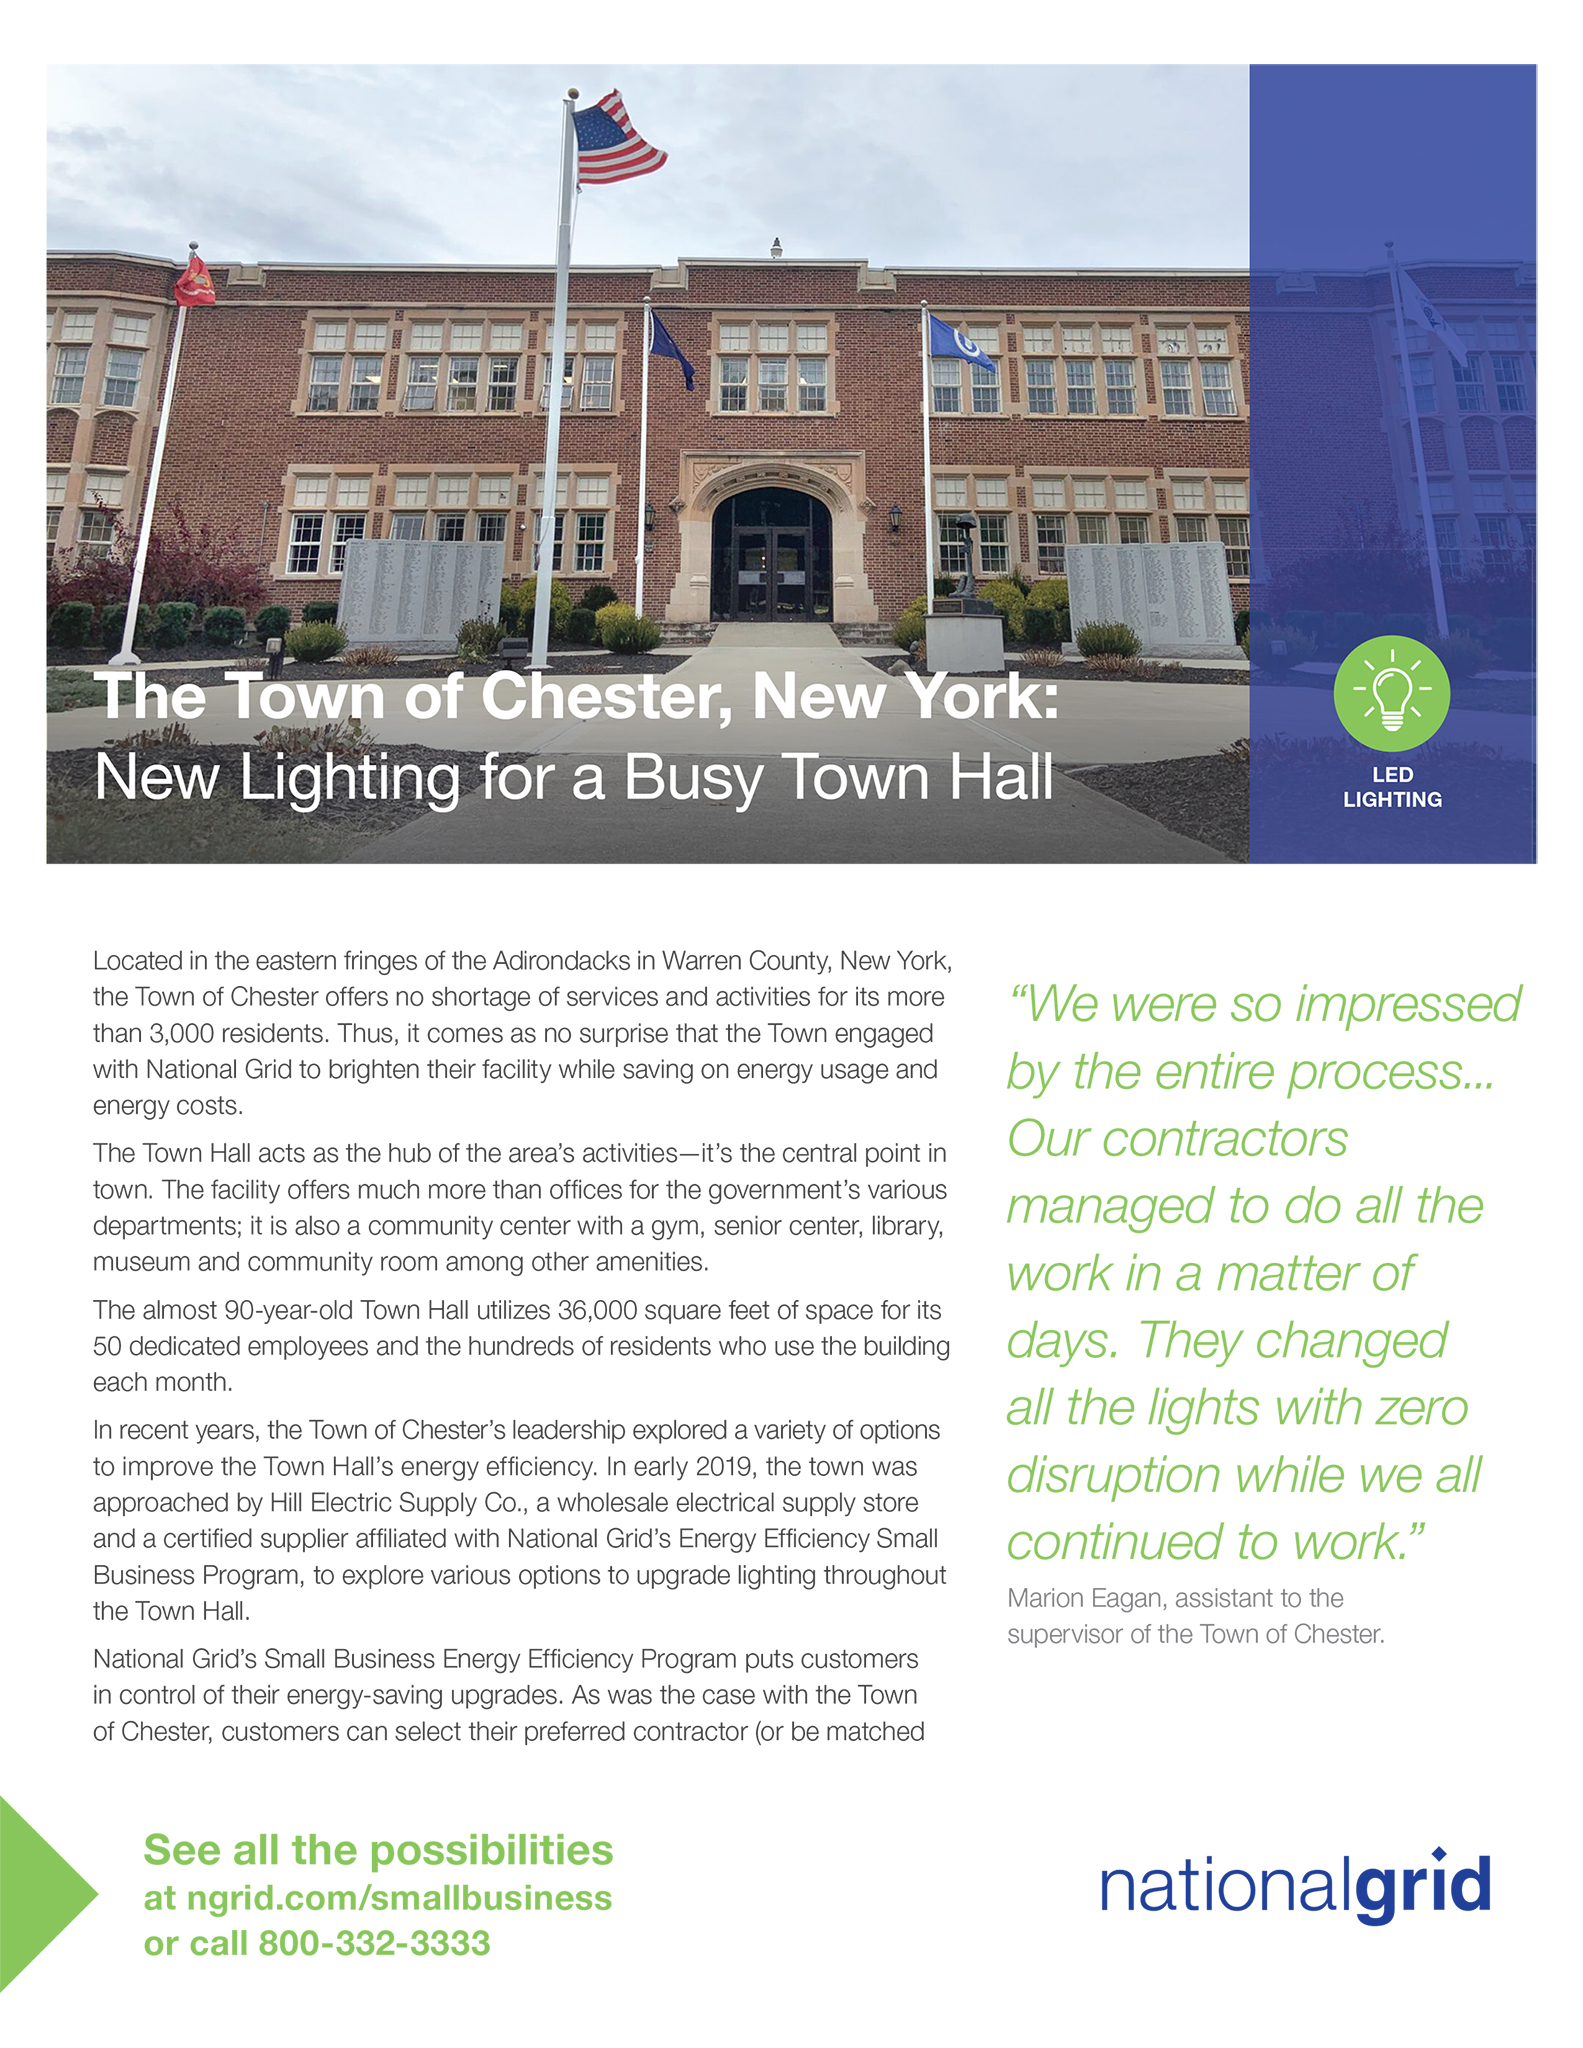 New Lighting for a Busy Town Hall: Chester, NY